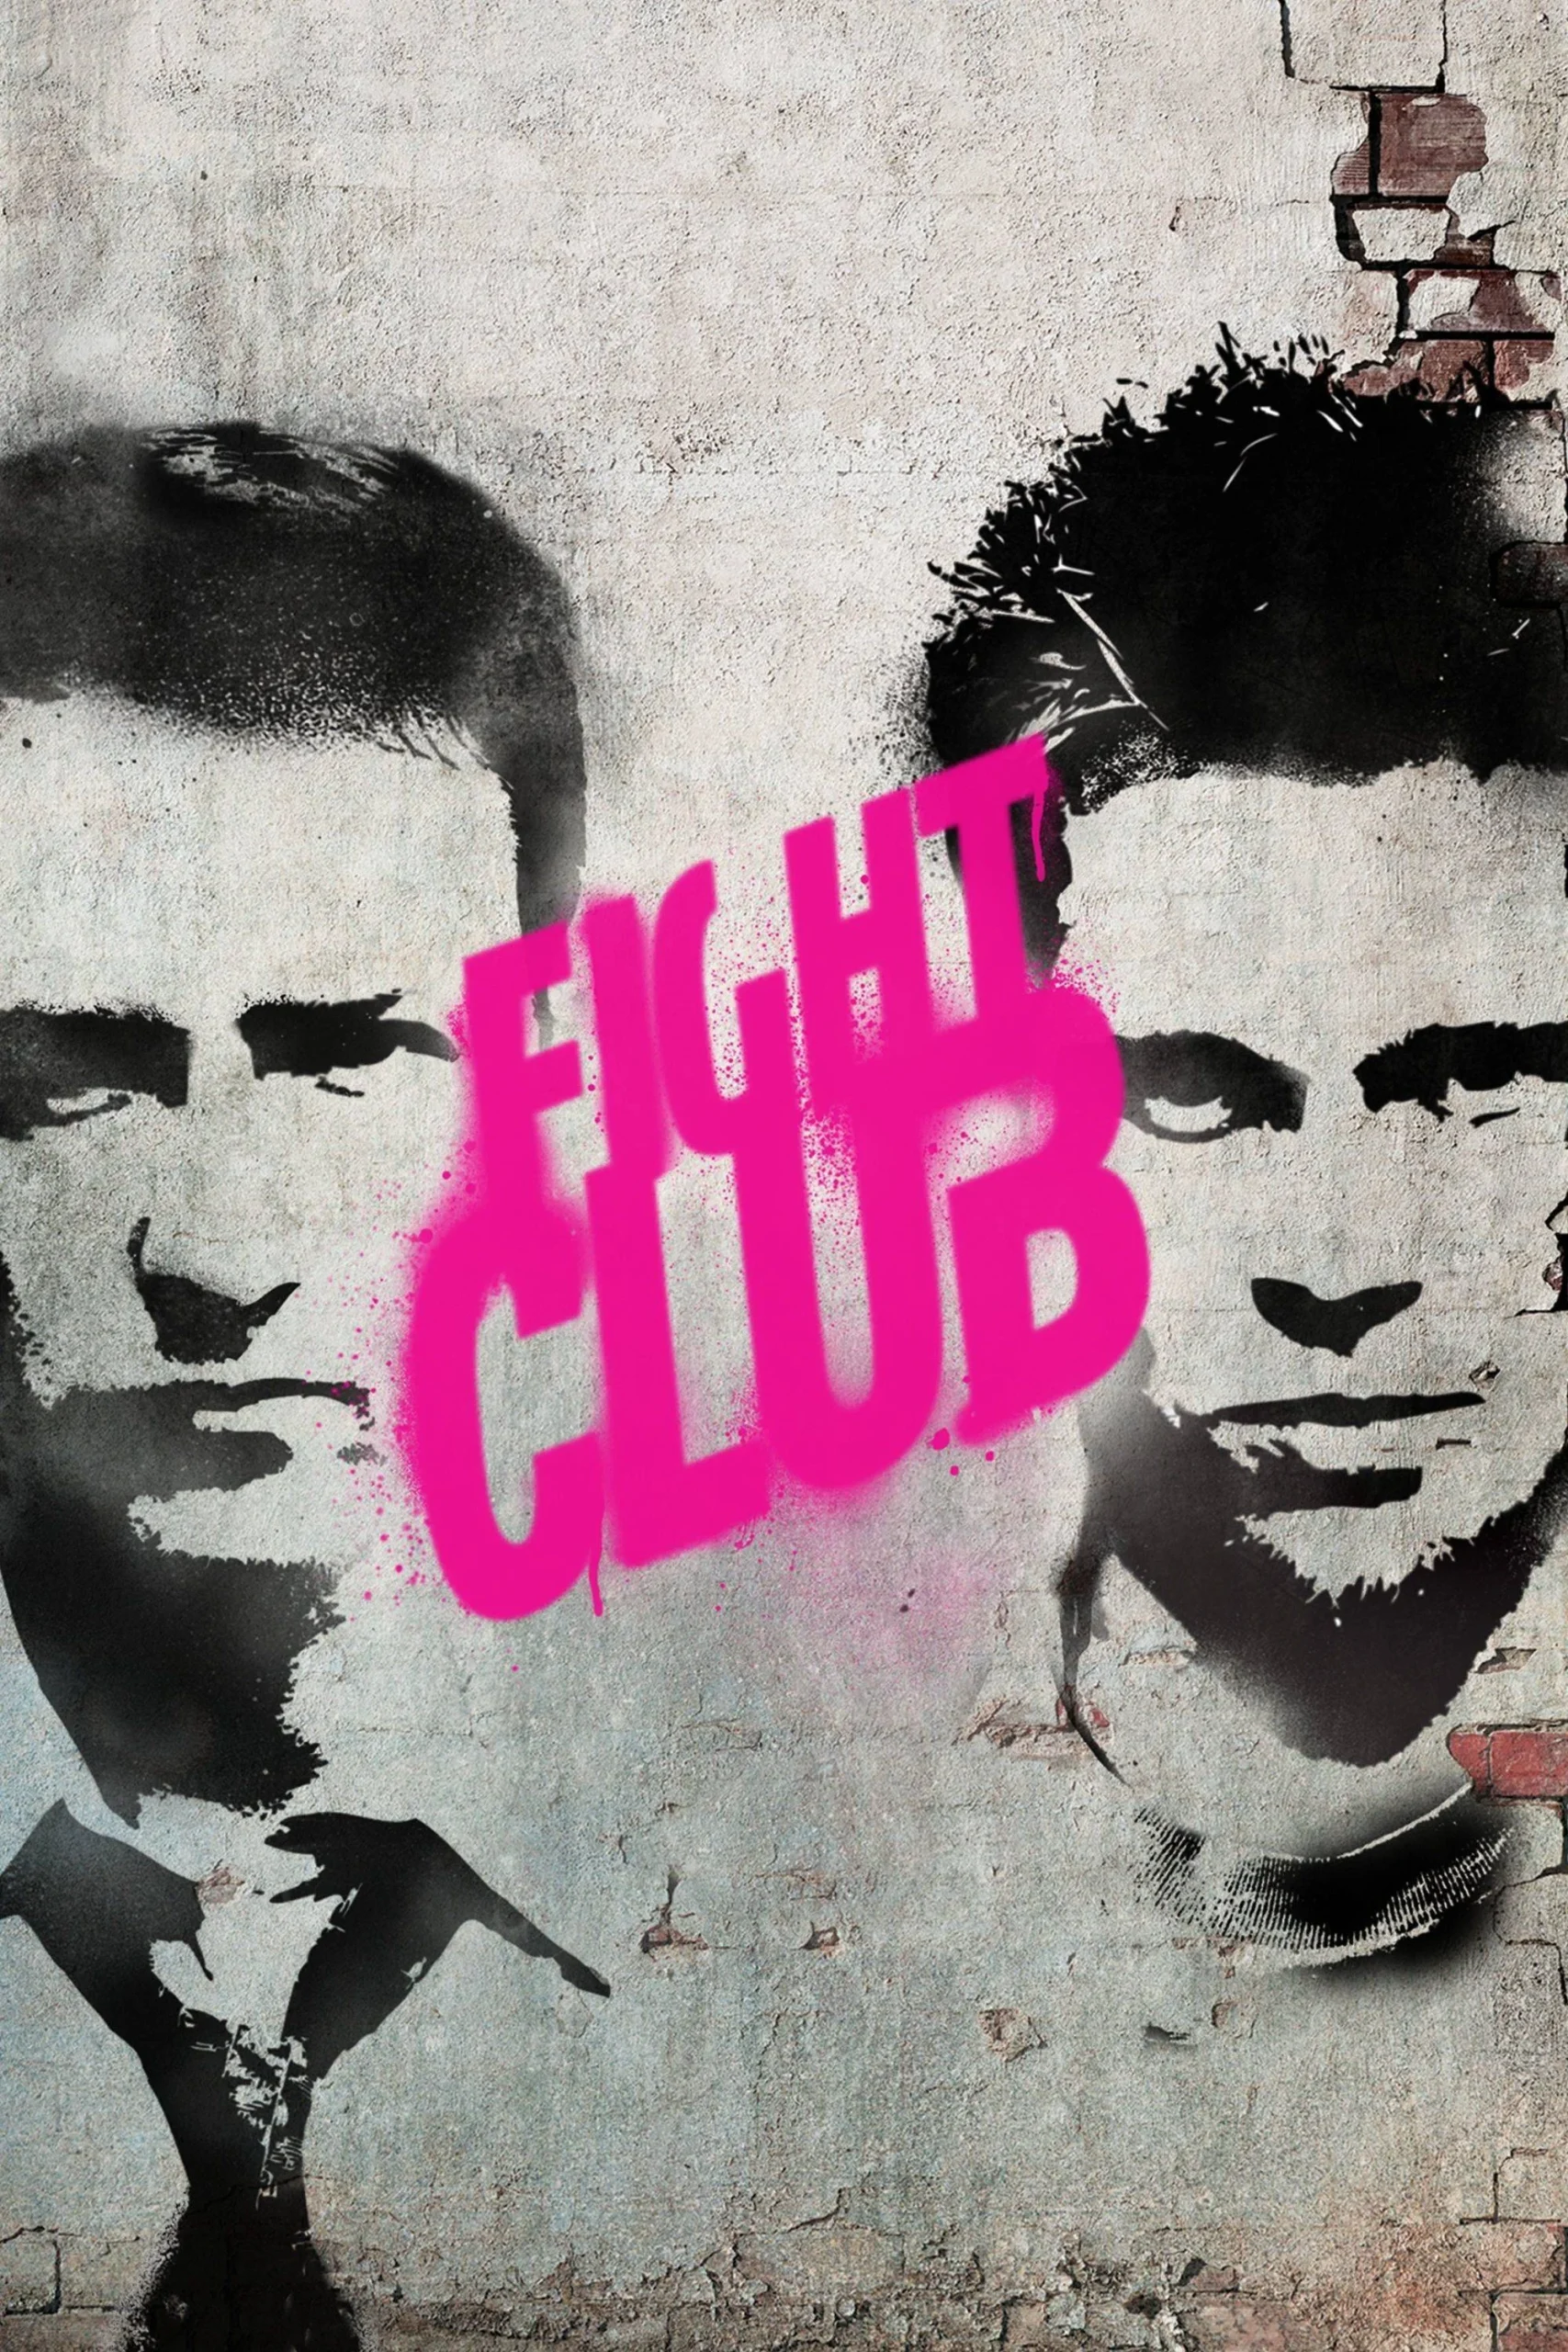 Why David Fincher Won't Rewatch Fight Club as He Gears Up for Netflix's The Killer Release